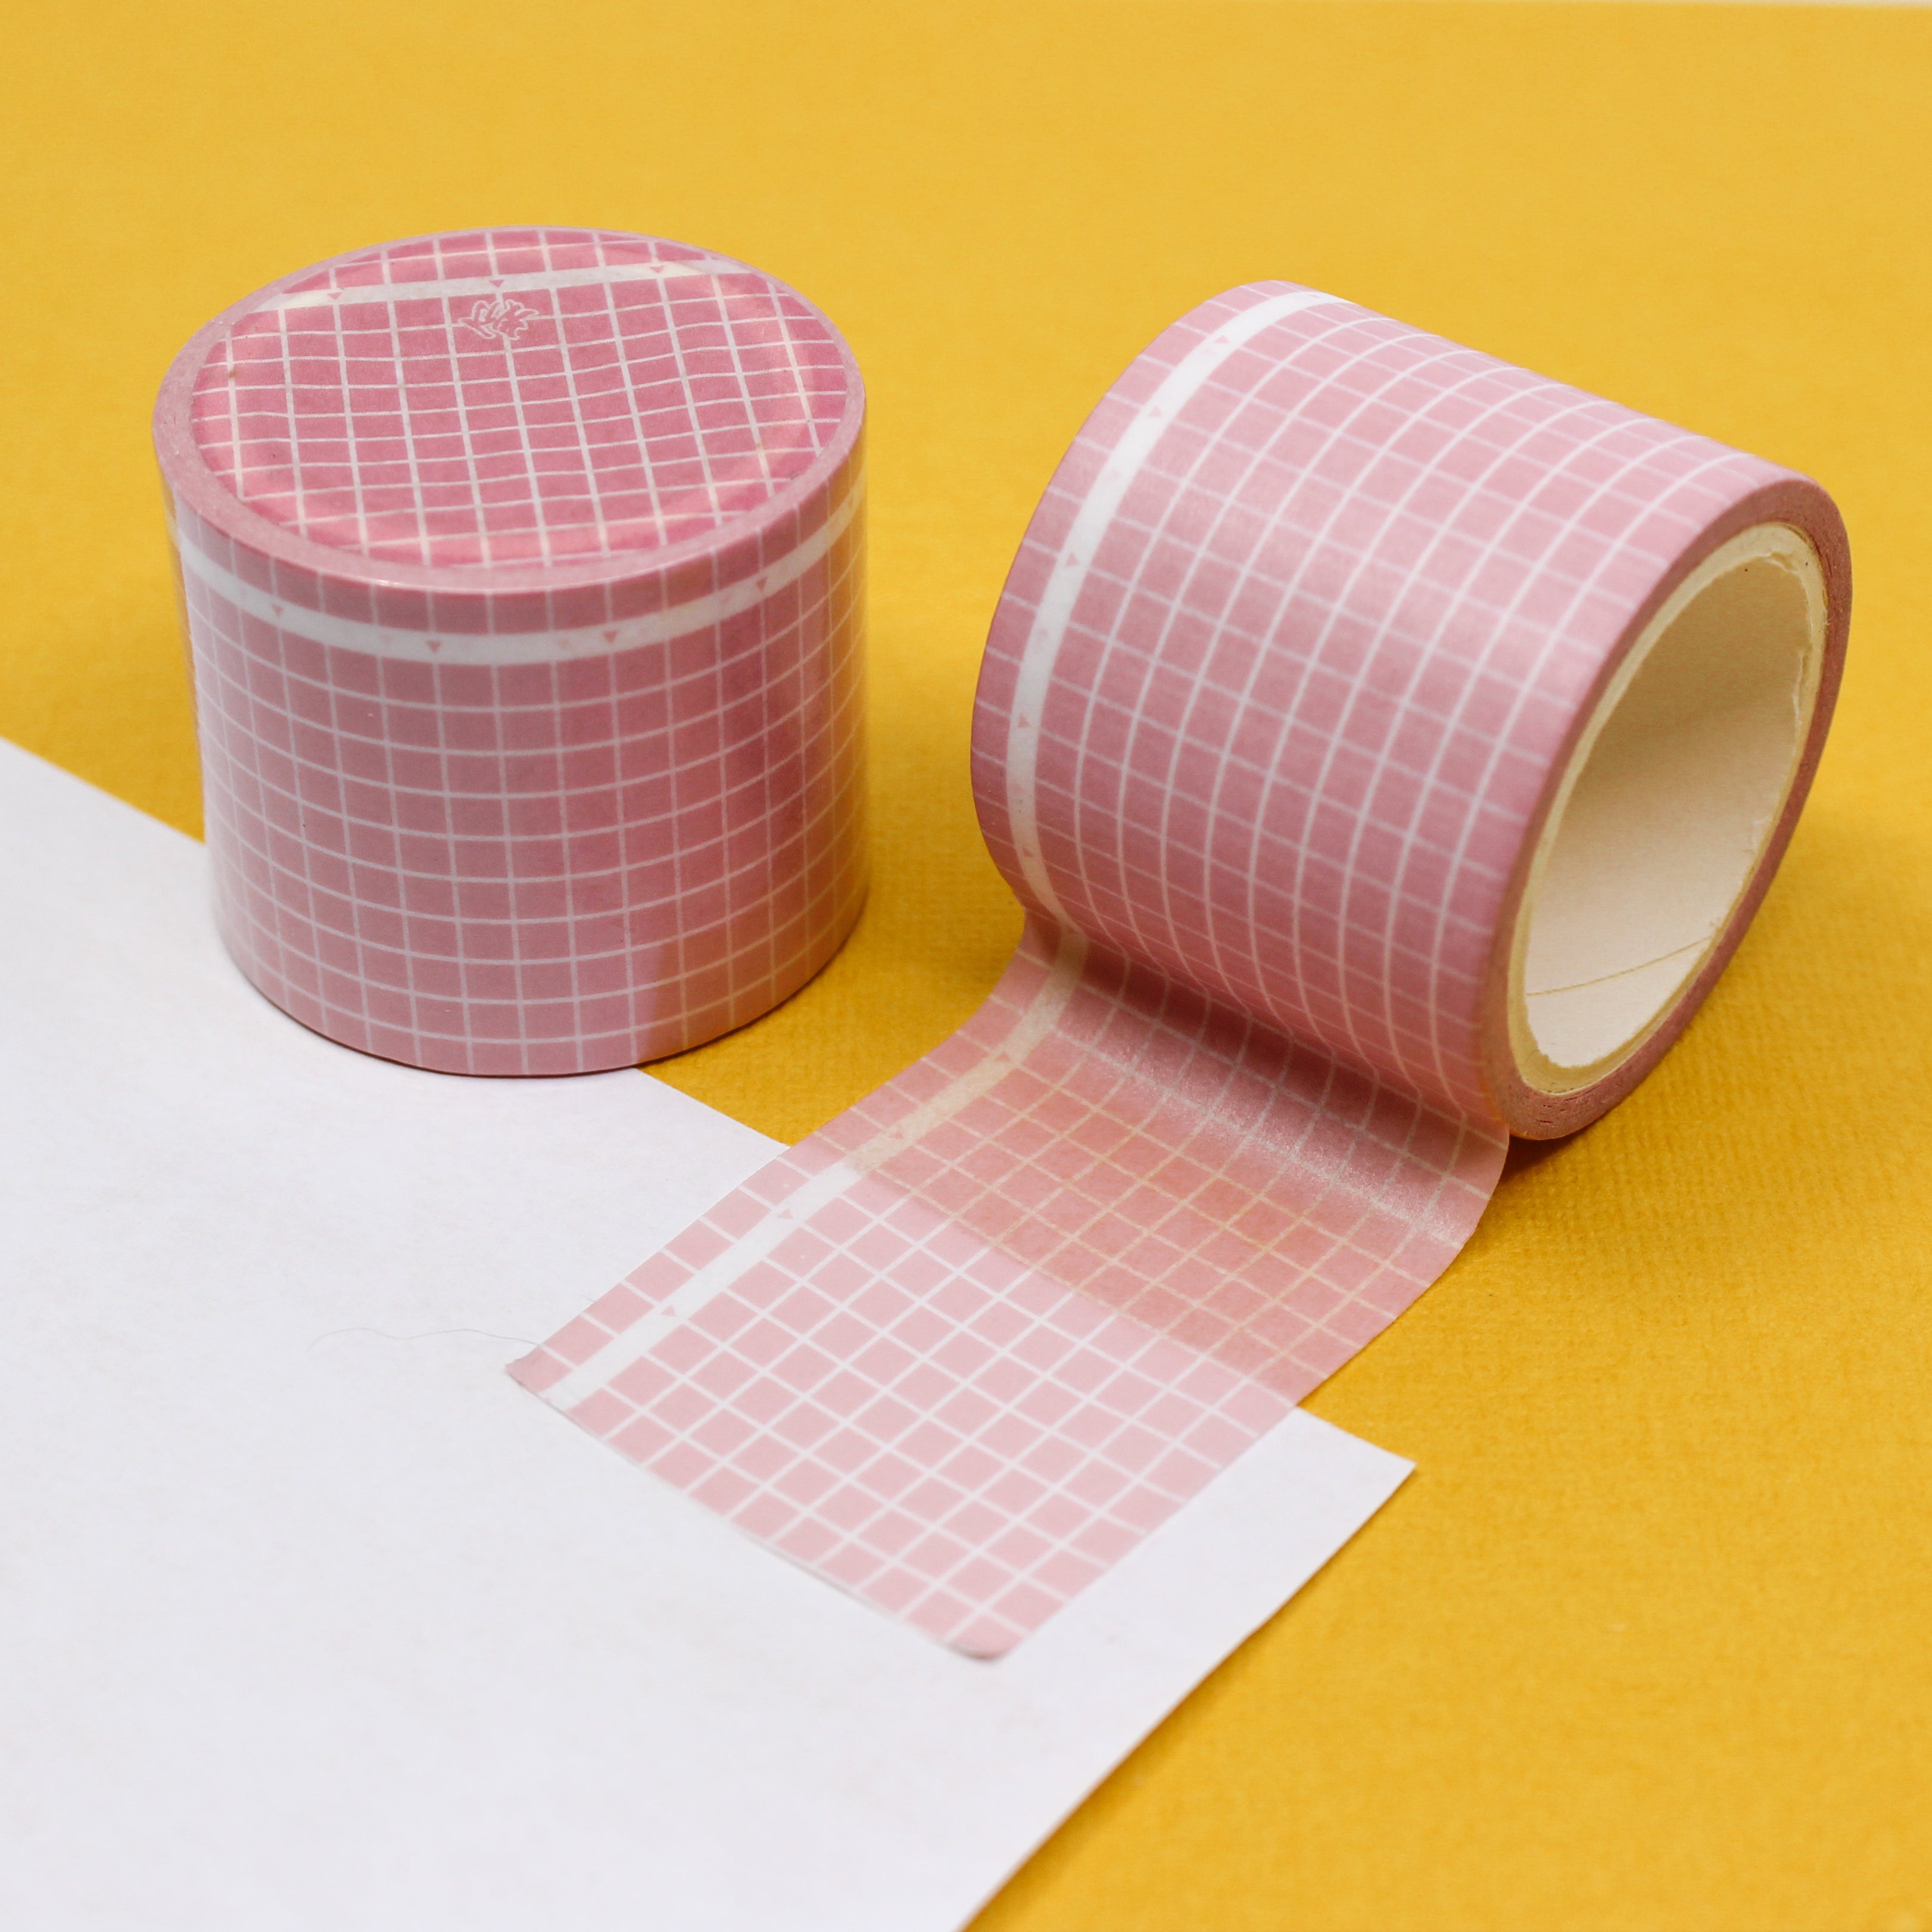 This is a pink wide grid view themed washi tape from BBB Supplies Craft Shop